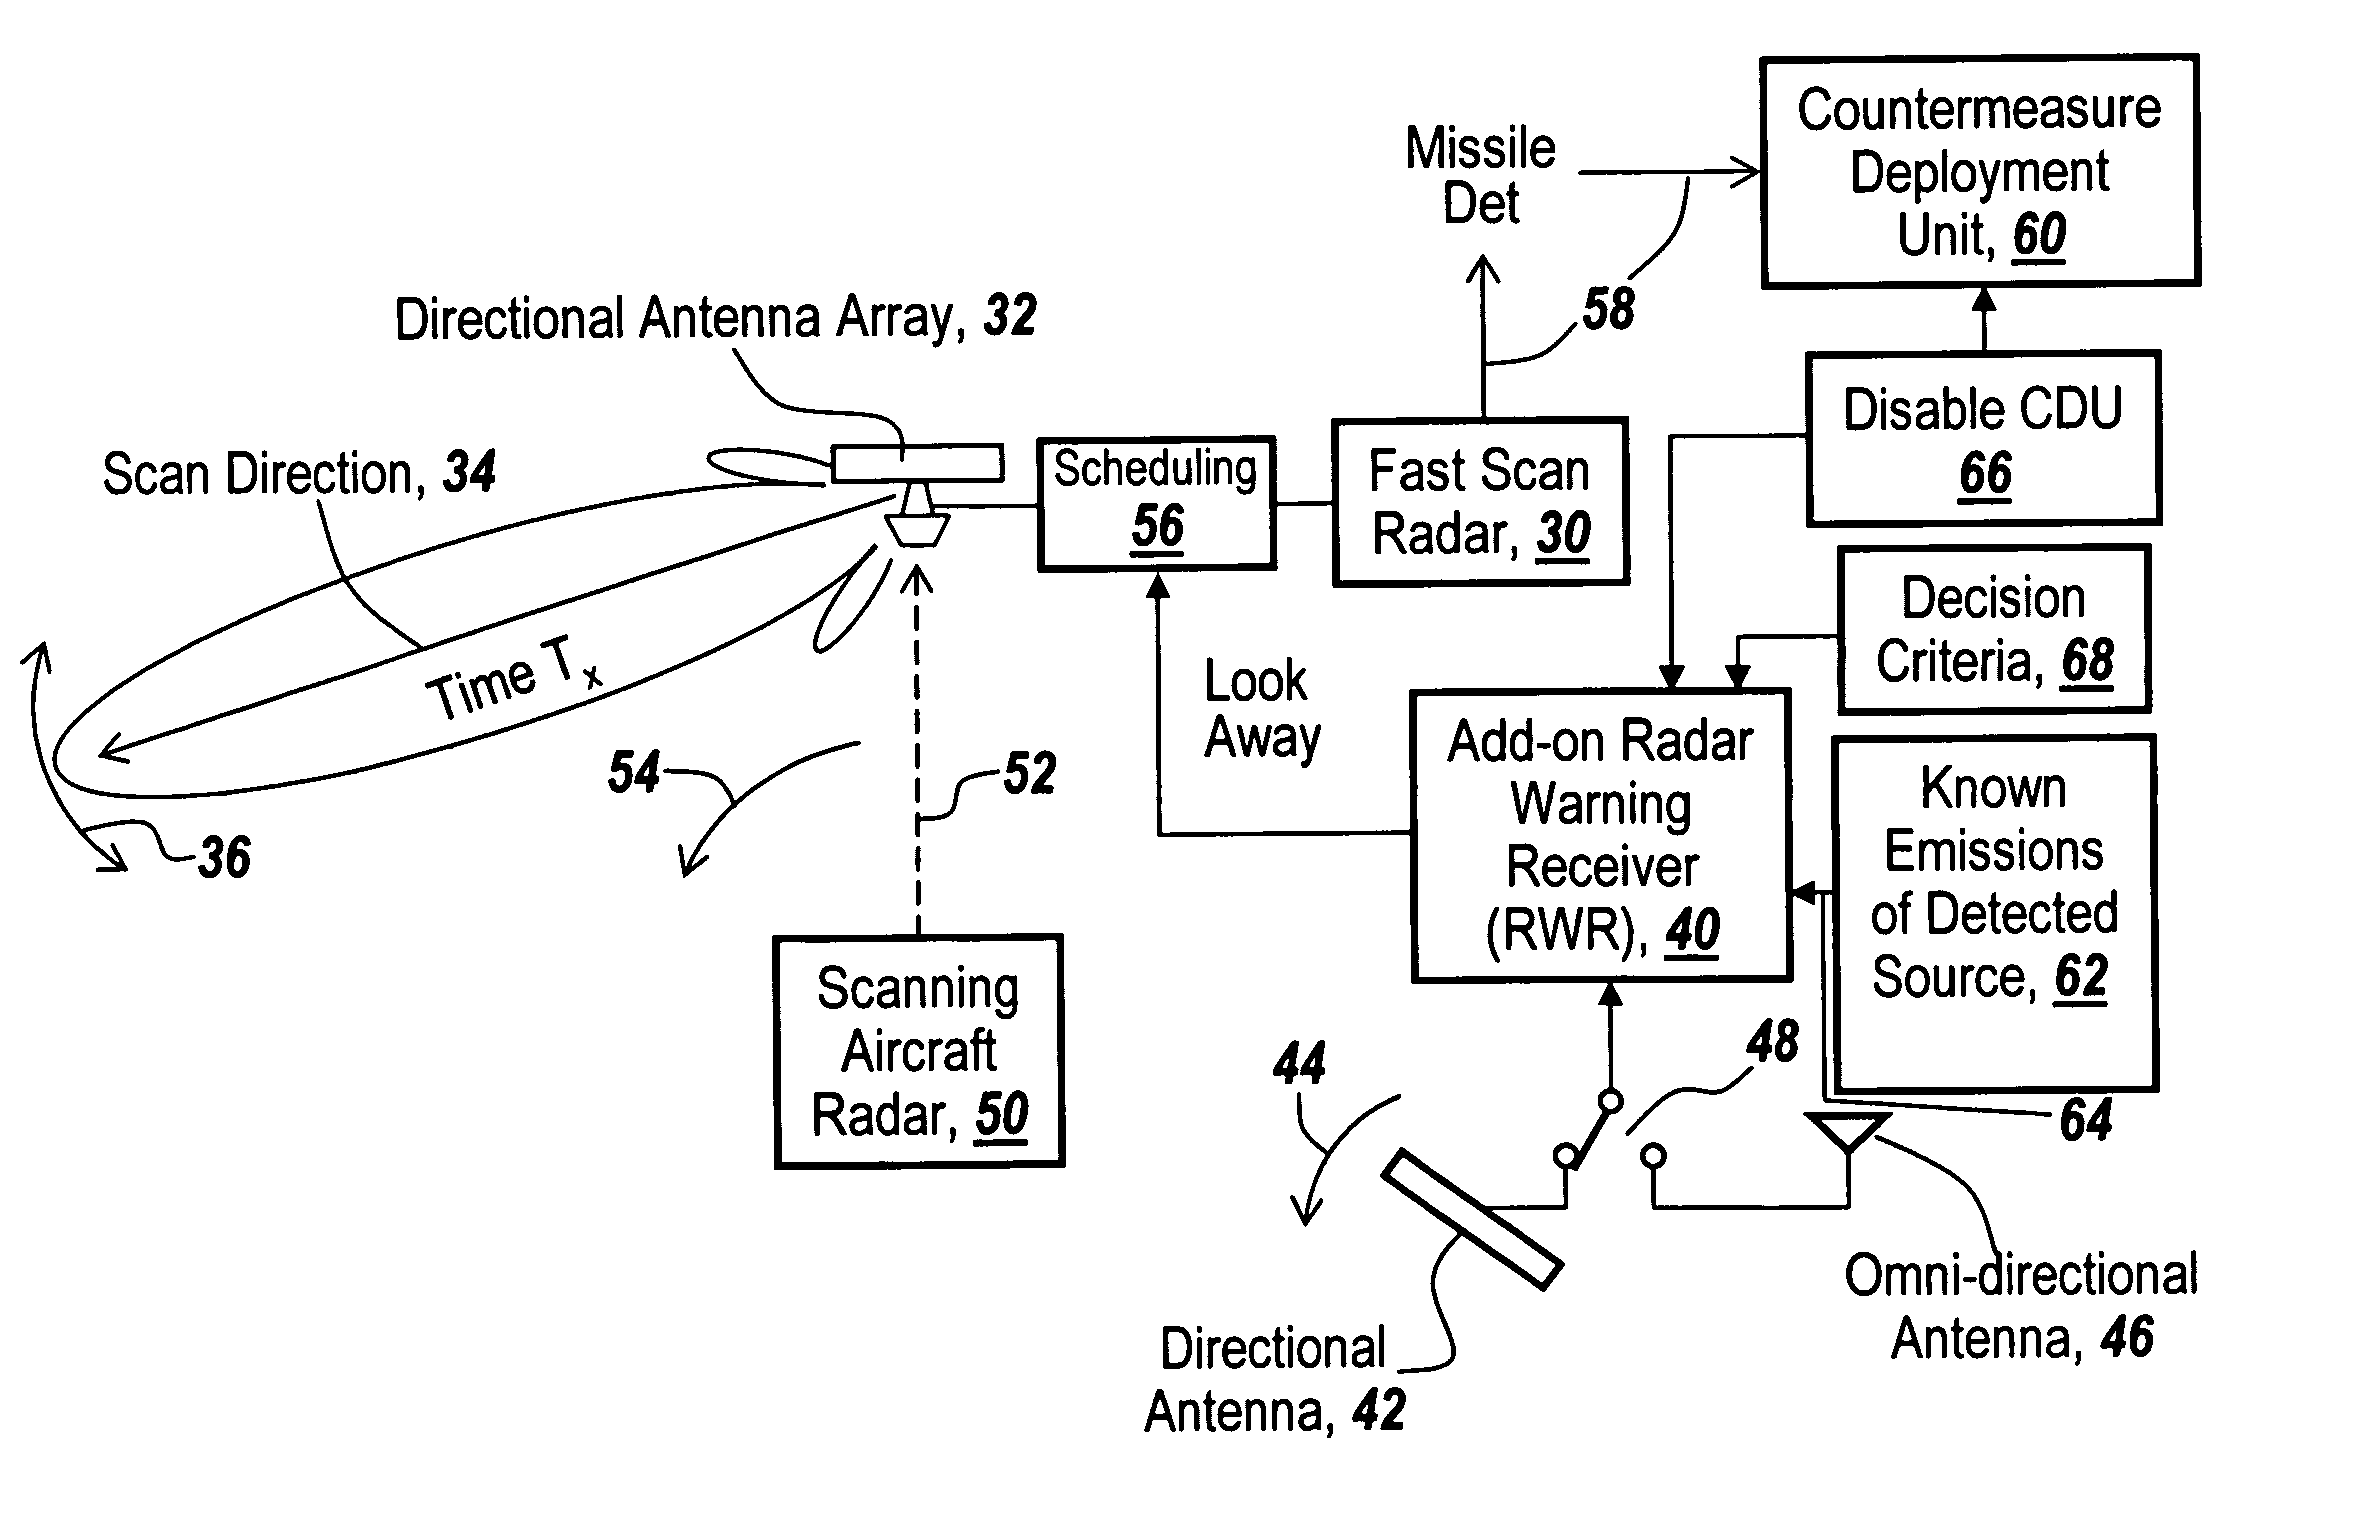 Method and apparatus for monitoring the RF environment to prevent airborne radar false alarms that initiate evasive maneuvers, reactionary displays or actions